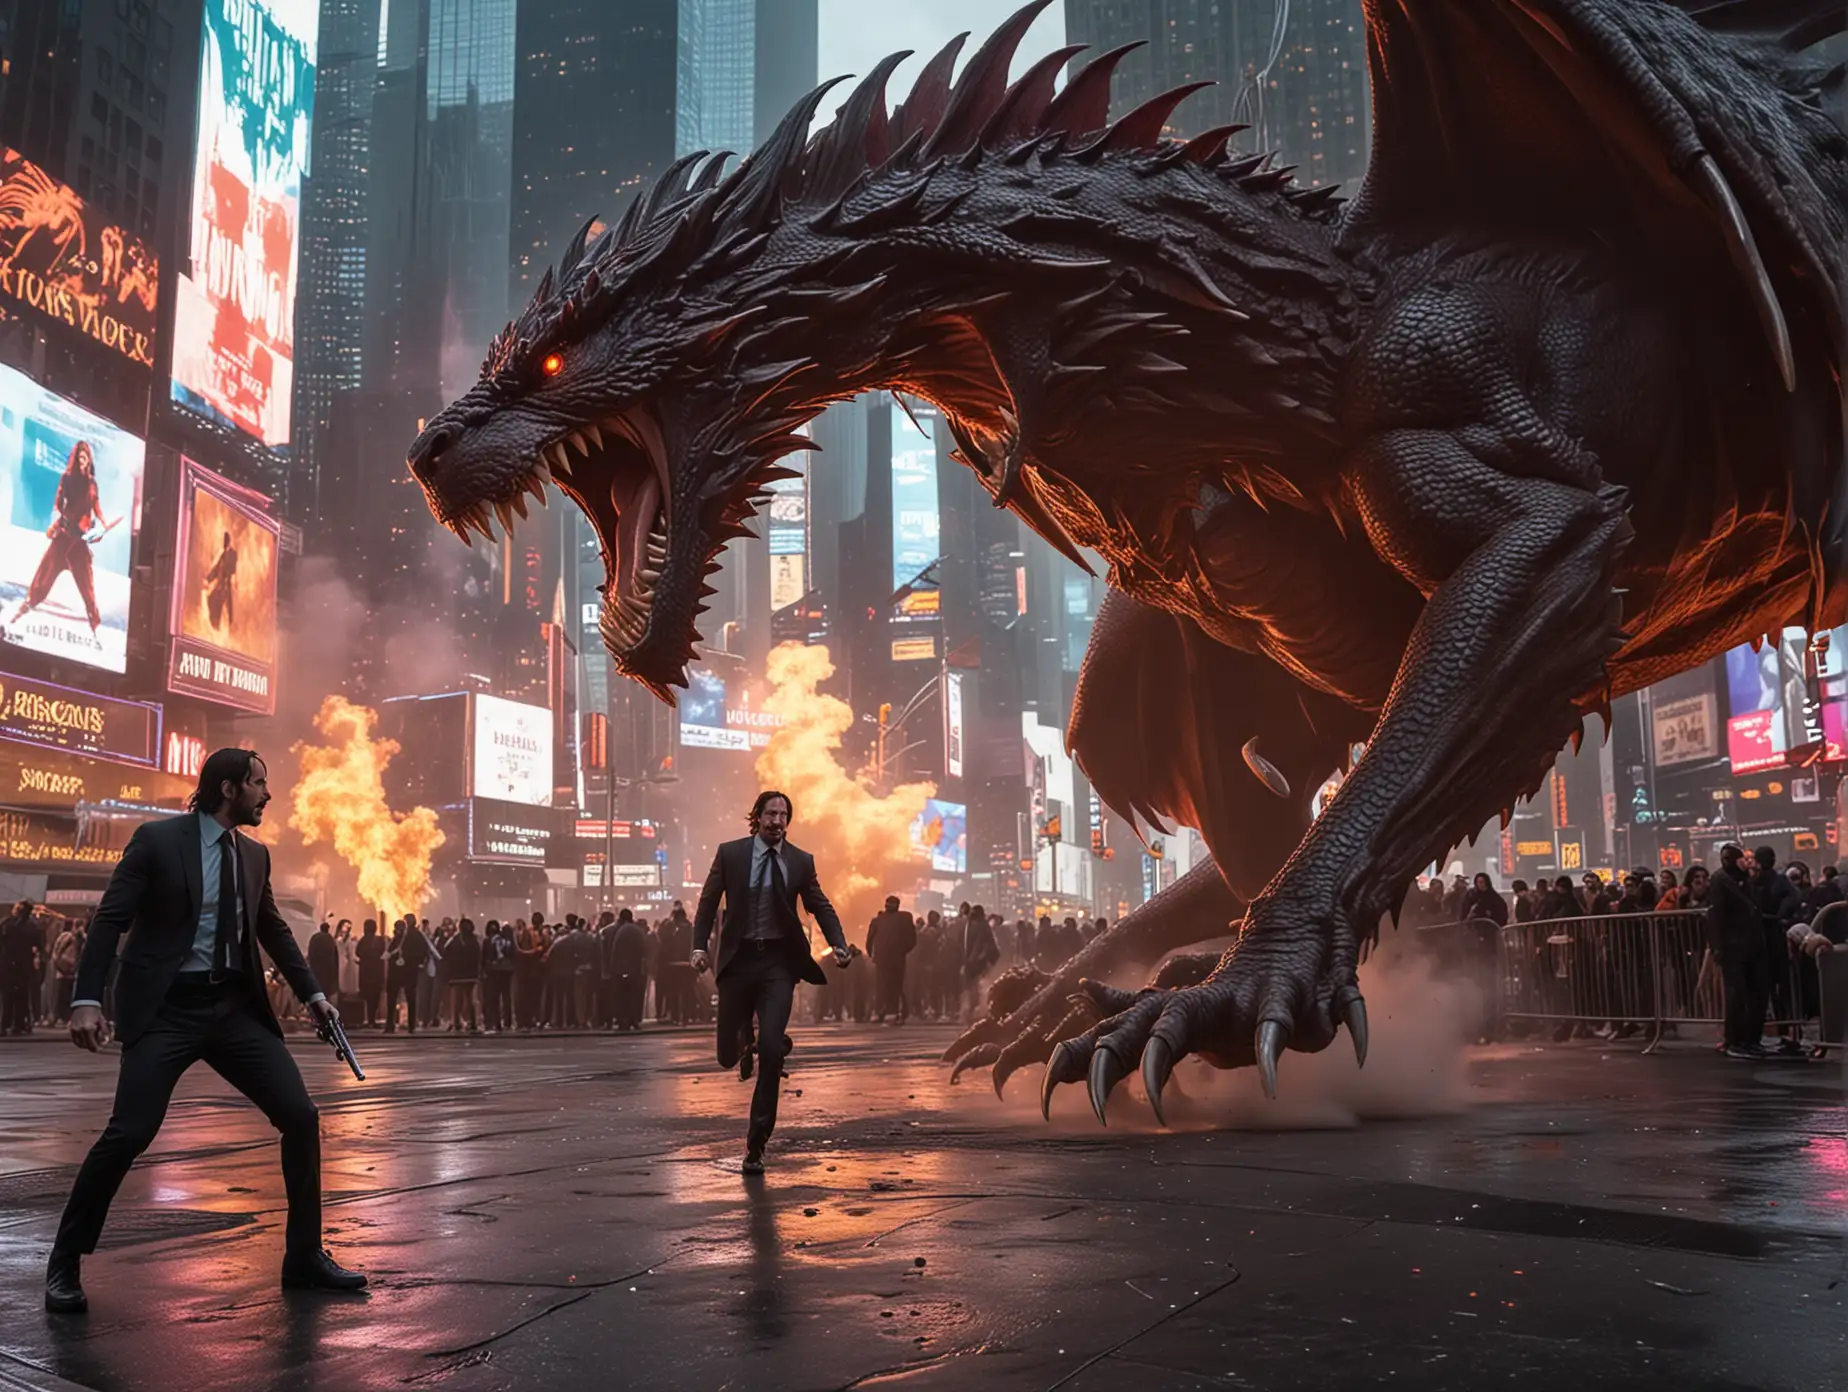 John Wick fighting against a dragon in Time's Square